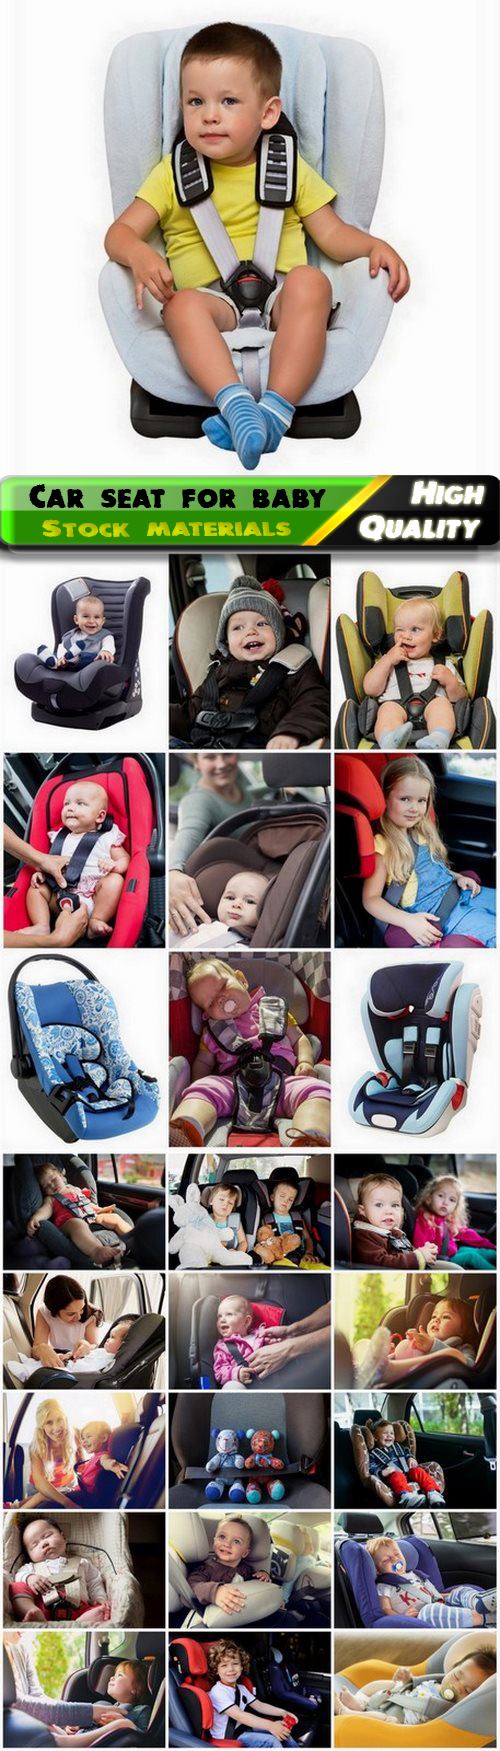 Car seat for baby and children safety on road 25 HQ Jpg